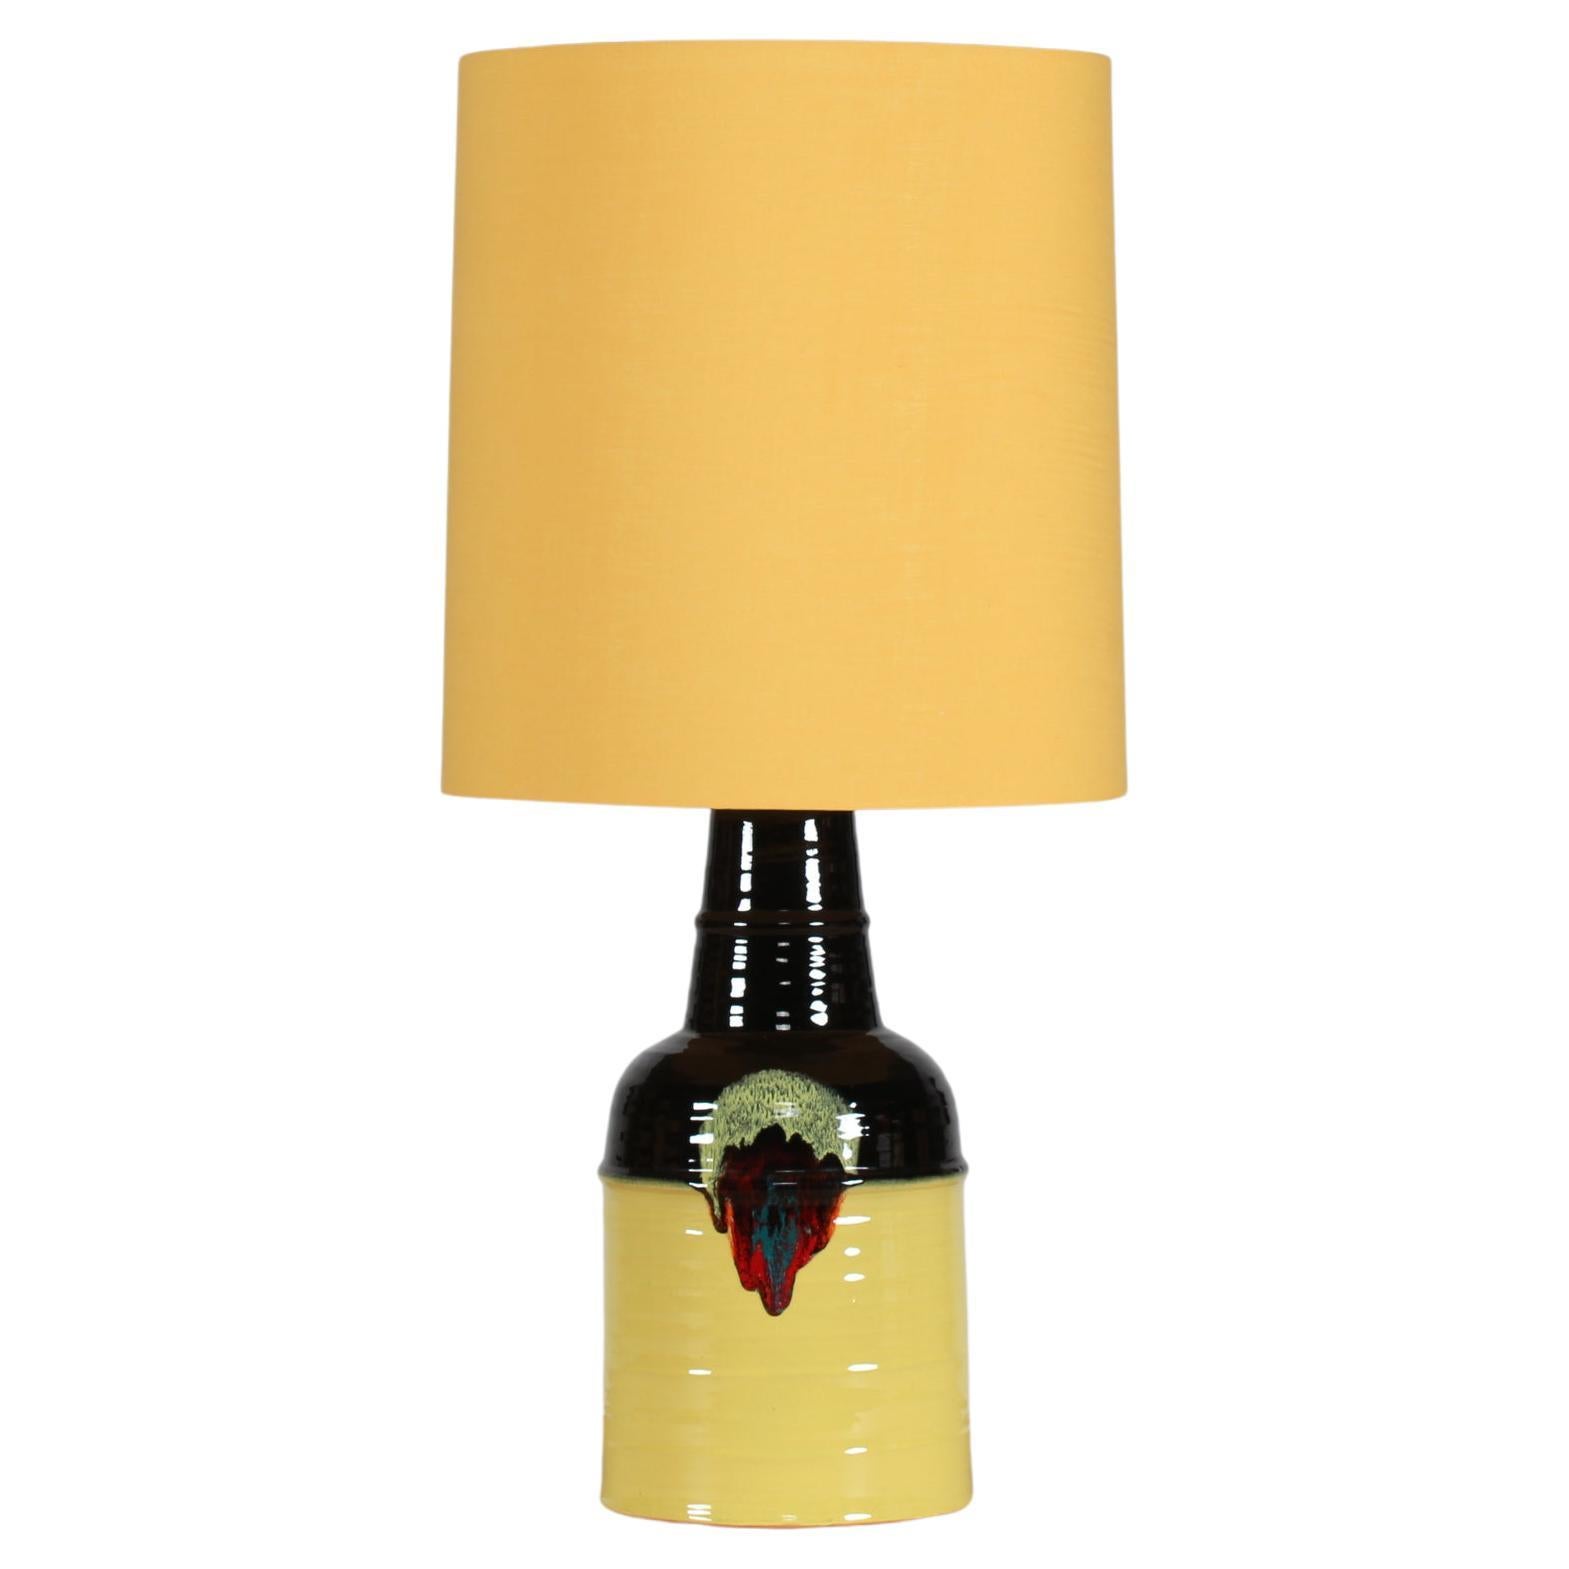 1970s Tall Bjørn Wiinblad Ceramic Table Lamp for Rosentahl with New Shade For Sale